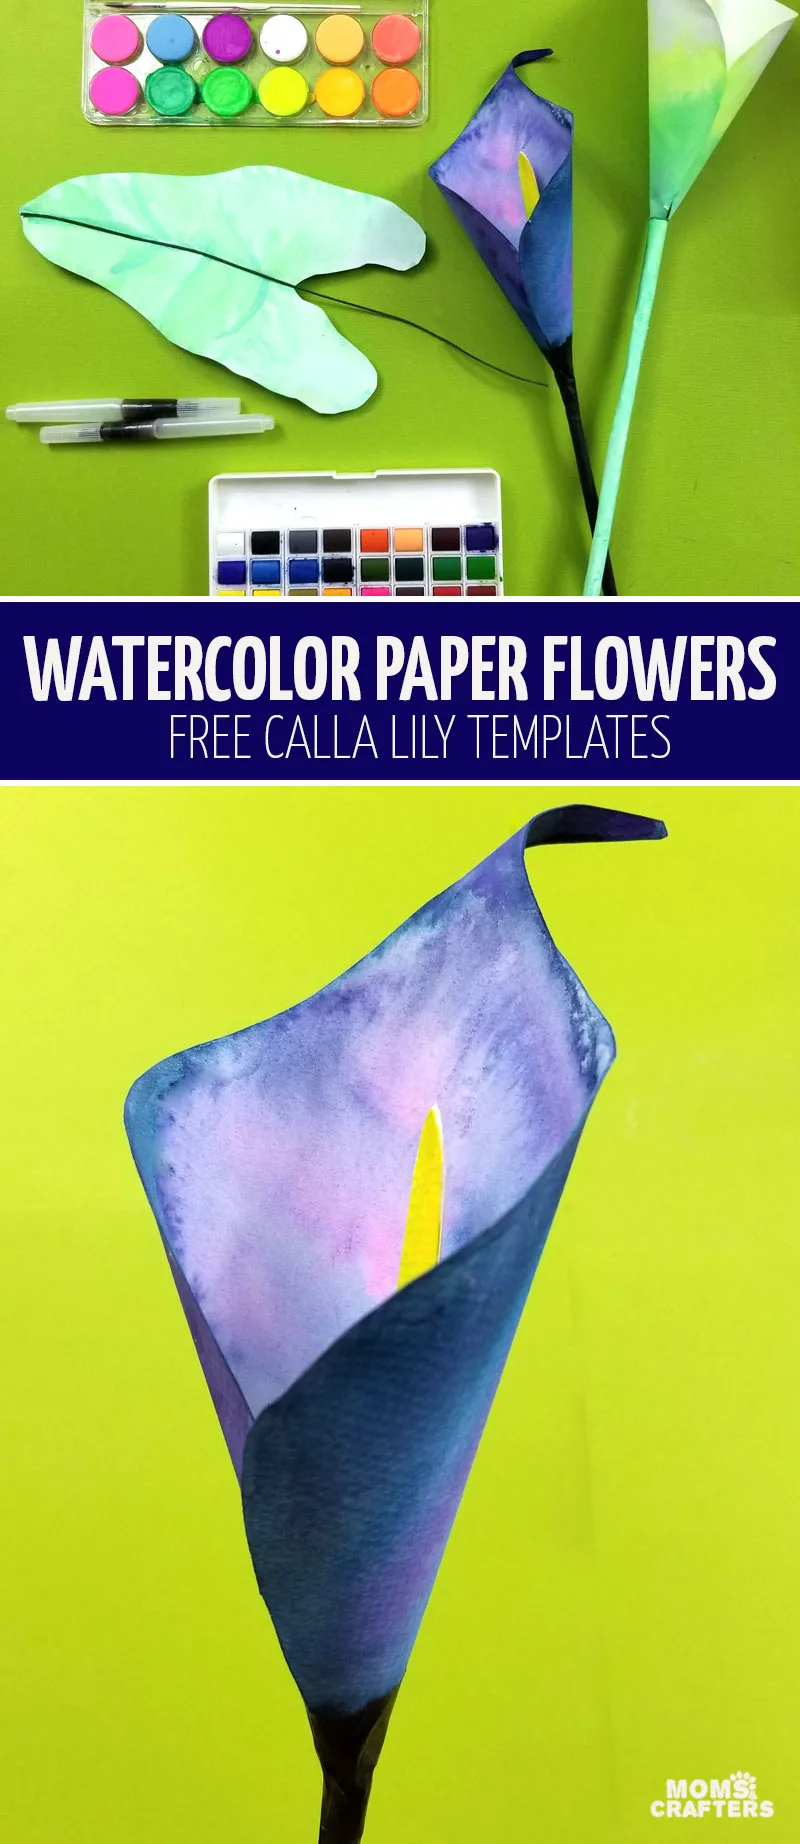 Click to learn how to make a paper calla lily with a free printable template! This fun paper flower tutorial and templates helps you make 3D watercolor flowers - a fun Mother's Day craft and DIY gift for teens to give!